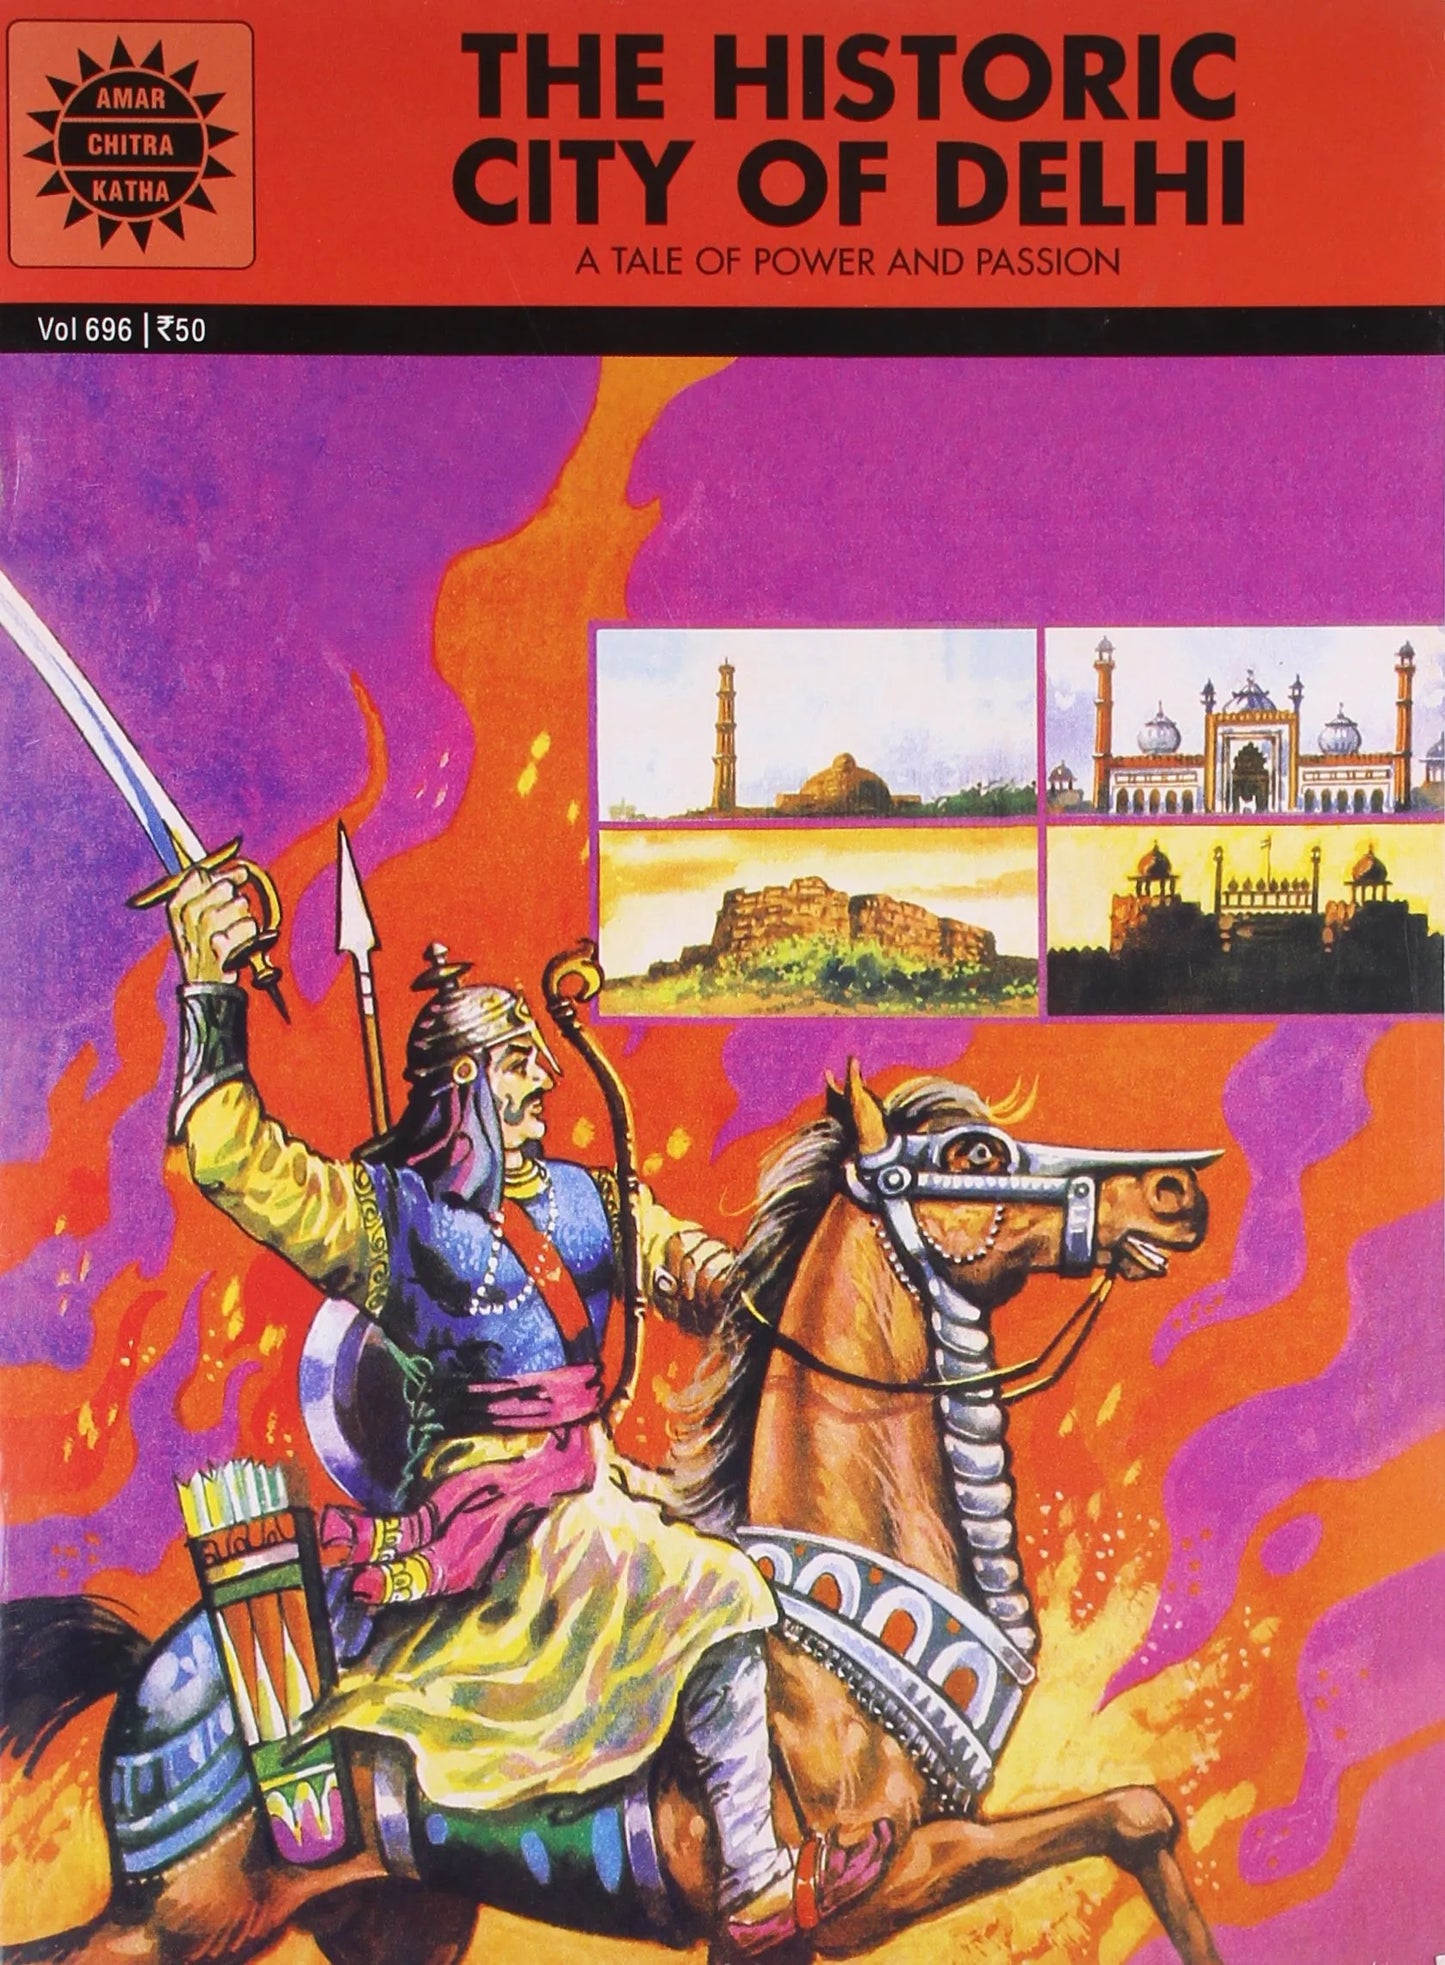 Amar Chitra Katha - The Historic City of Delhi - The Tale of Power and Passion